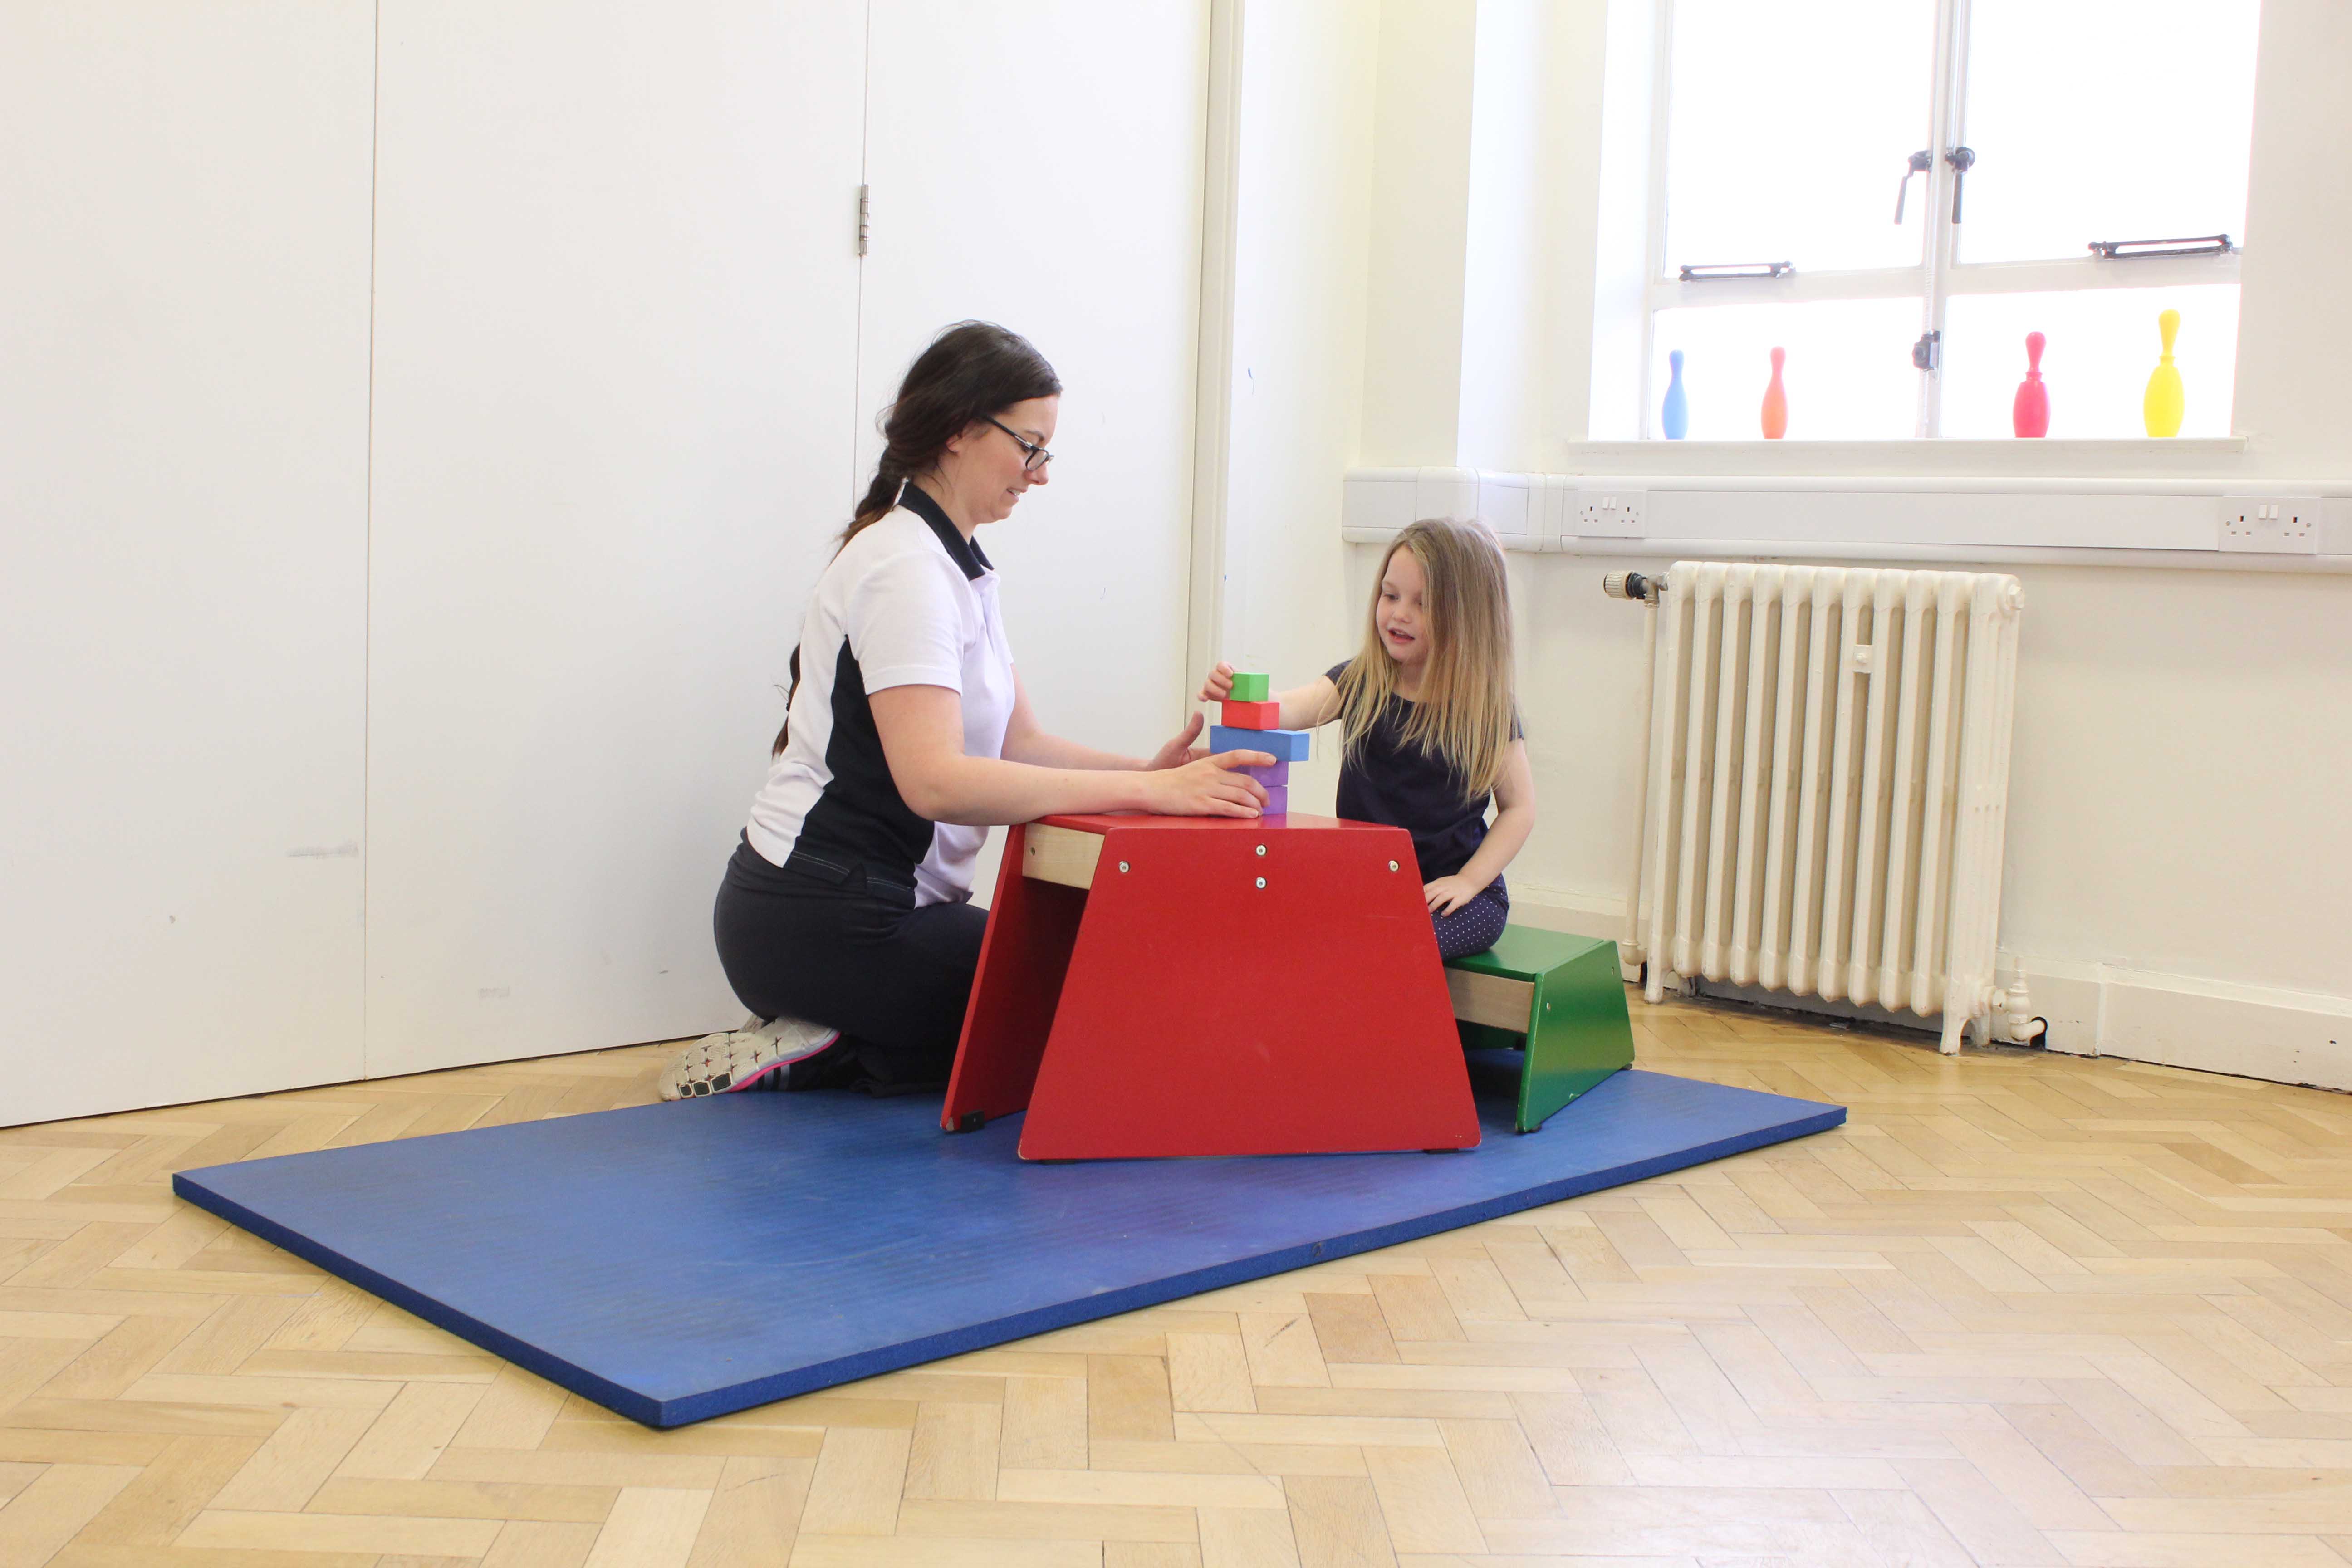 Fine motor skill rehabilitation for the upper limb assisted by a specialist paediatric physiotherapist